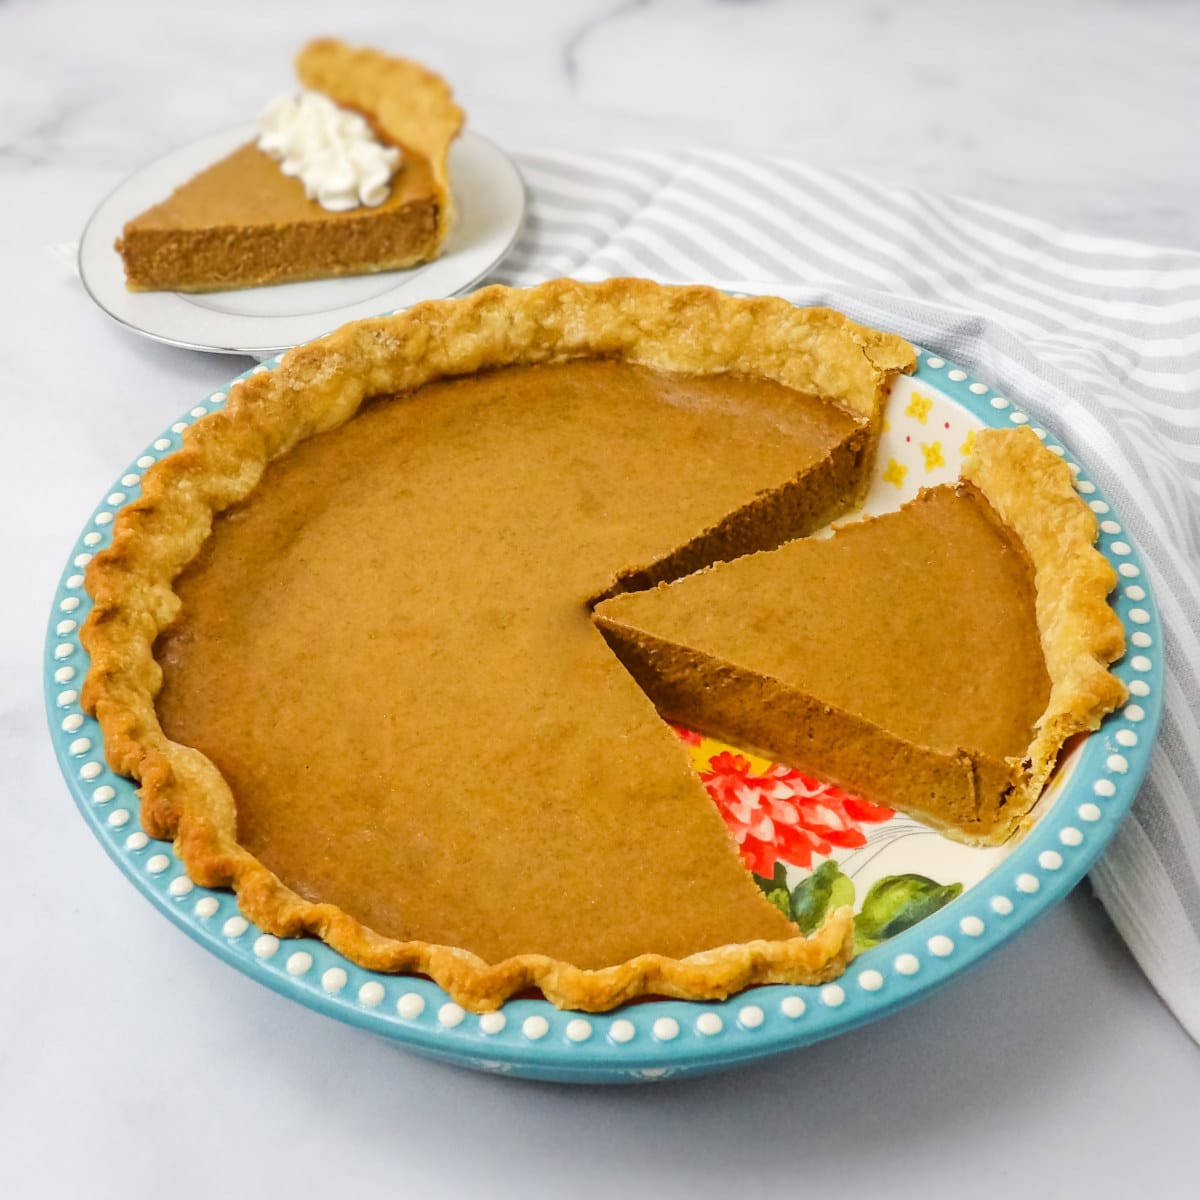 Baked homemade pumpkin pie in a blue pie dish on a white marble countertop.